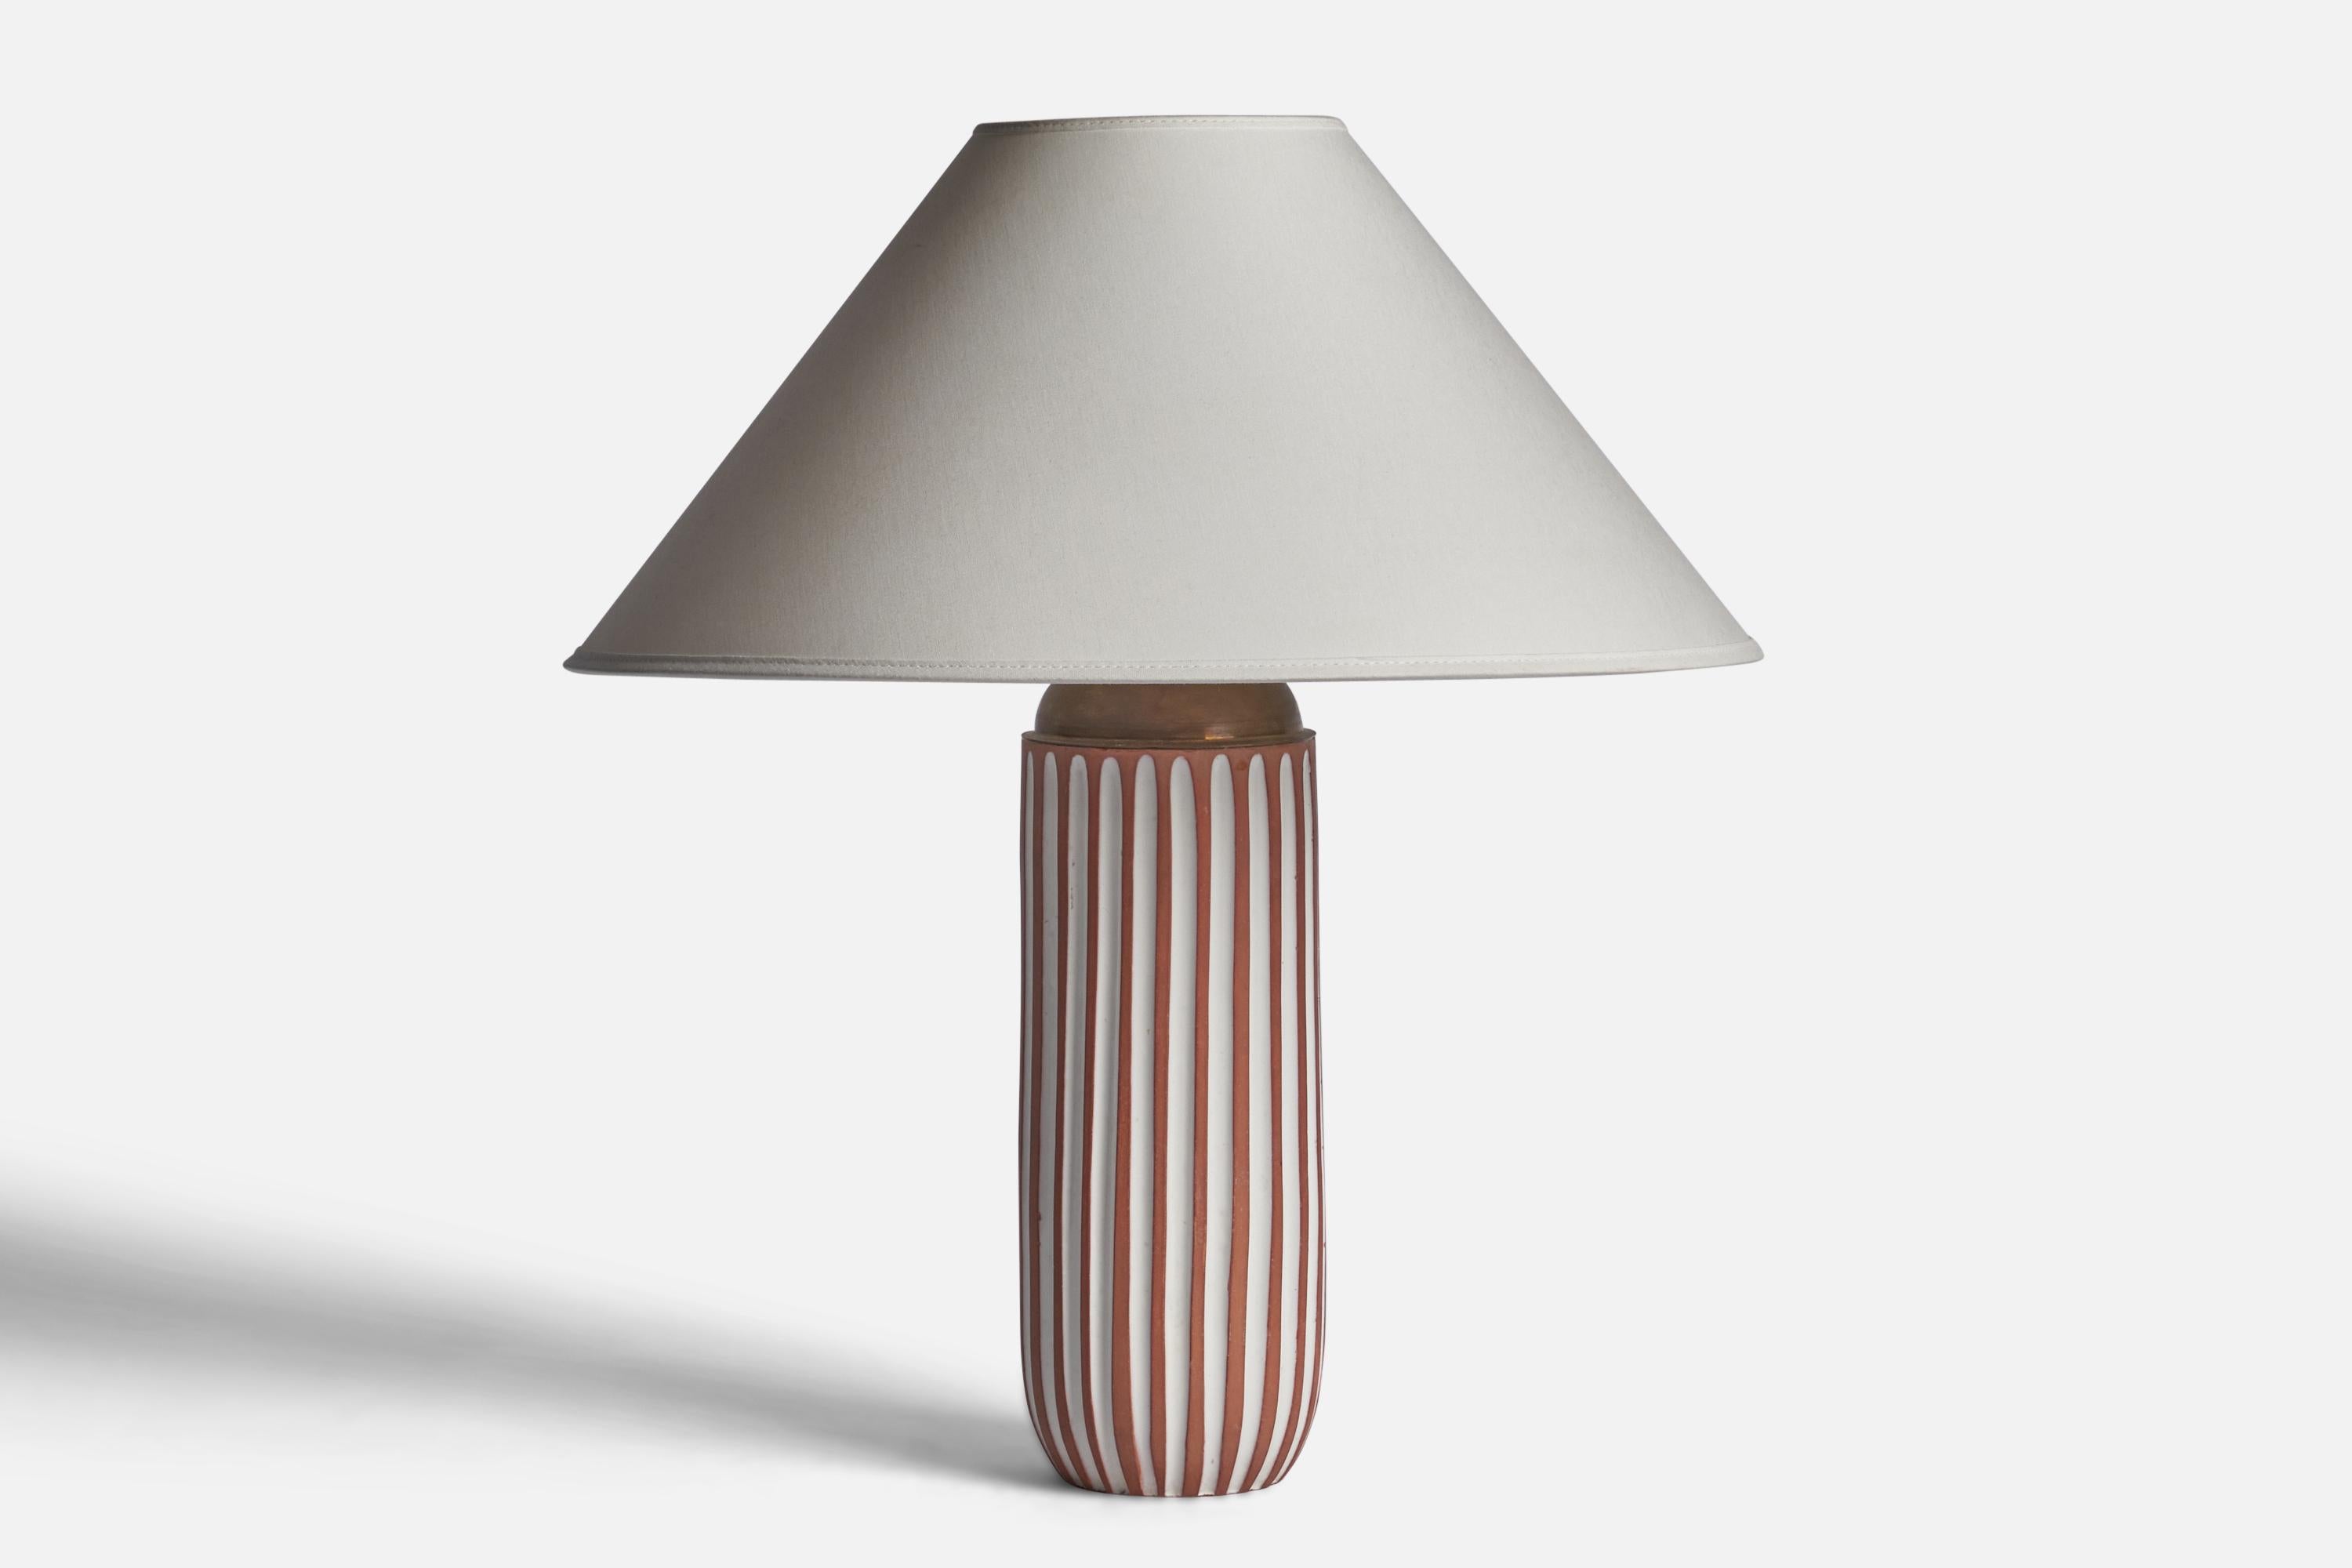 A fluted white and red earthenware table lamp designed by Ingrid Atterberg and produced by Upsala Ekeby, Sweden, 1950s.

Dimensions of Lamp (inches): 13.45” H x 4” Diameter
Dimensions of Shade (inches): 4.5” Top Diameter x 16” Bottom Diameter x